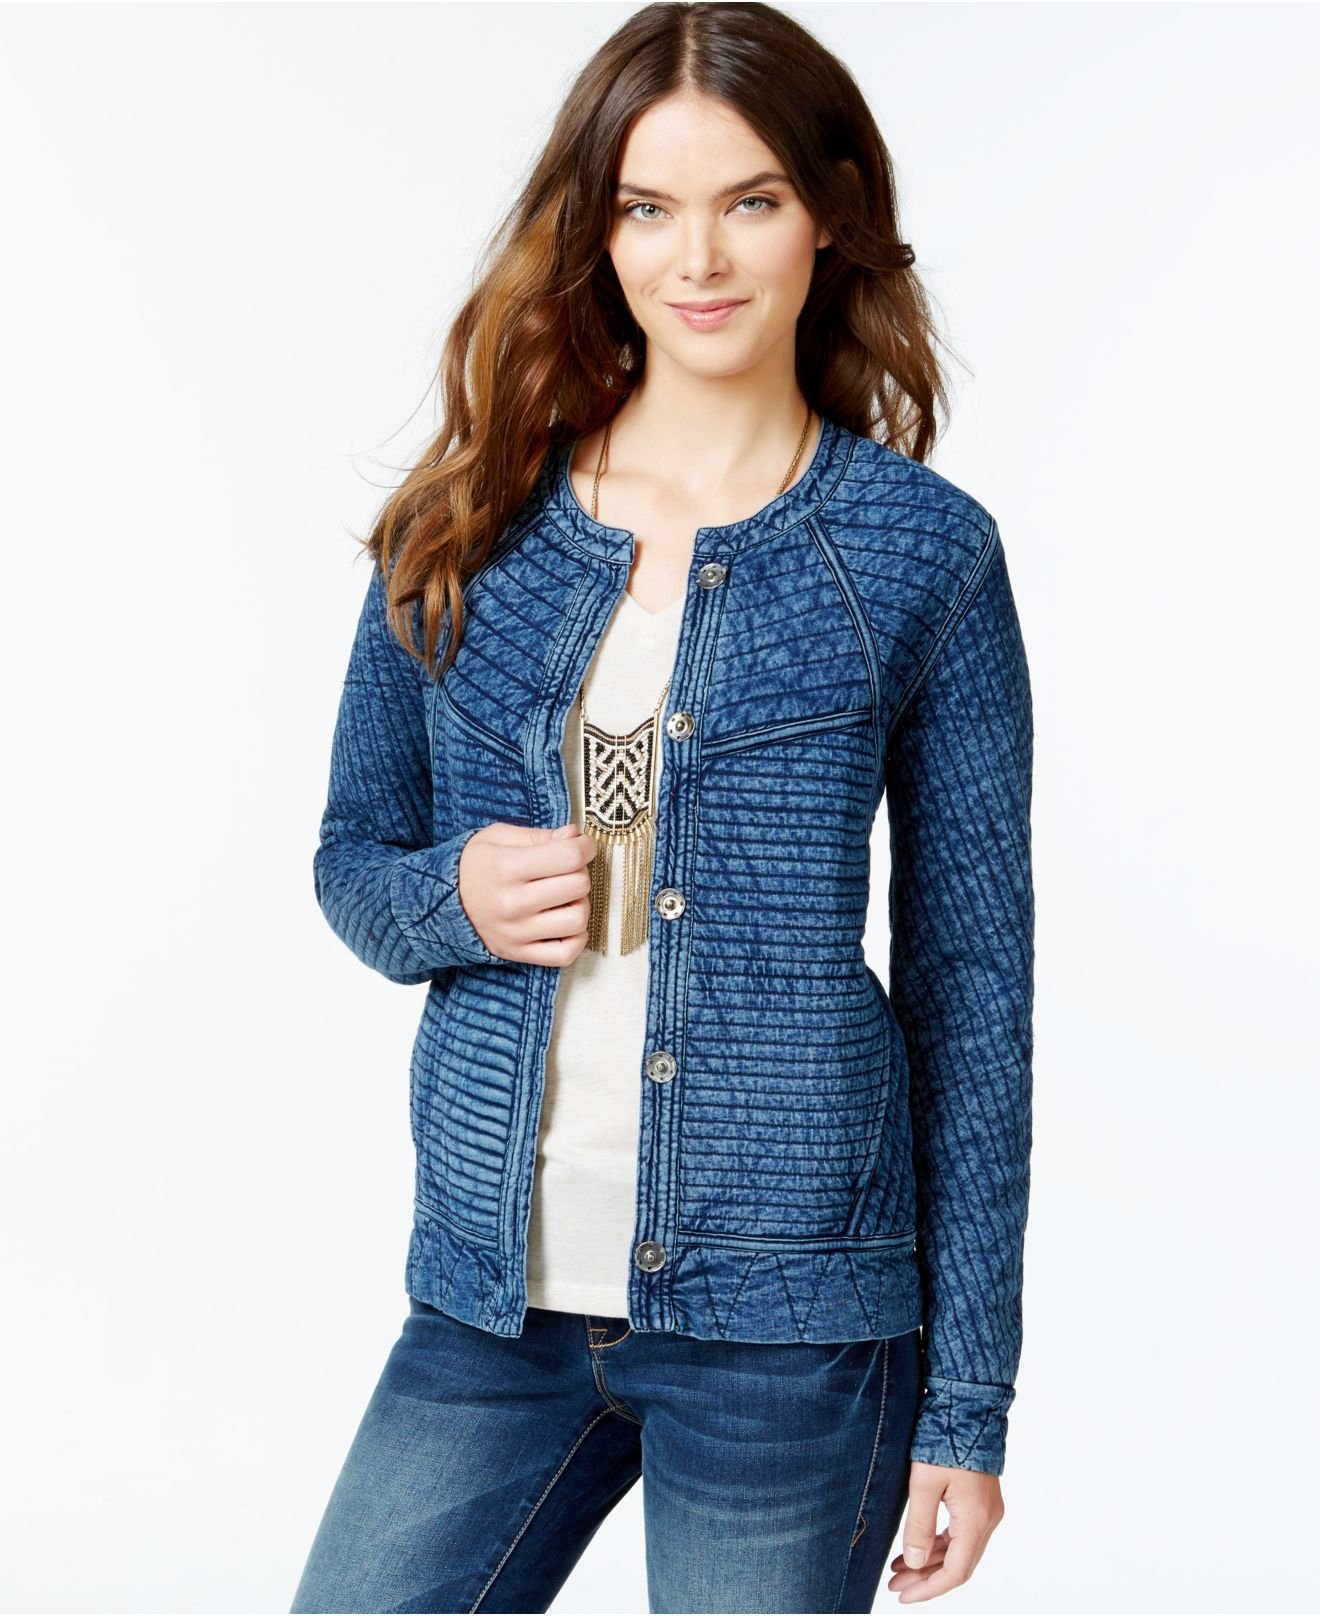 Lyst - Lucky brand Lucky Brand Quilted Jacket in Blue